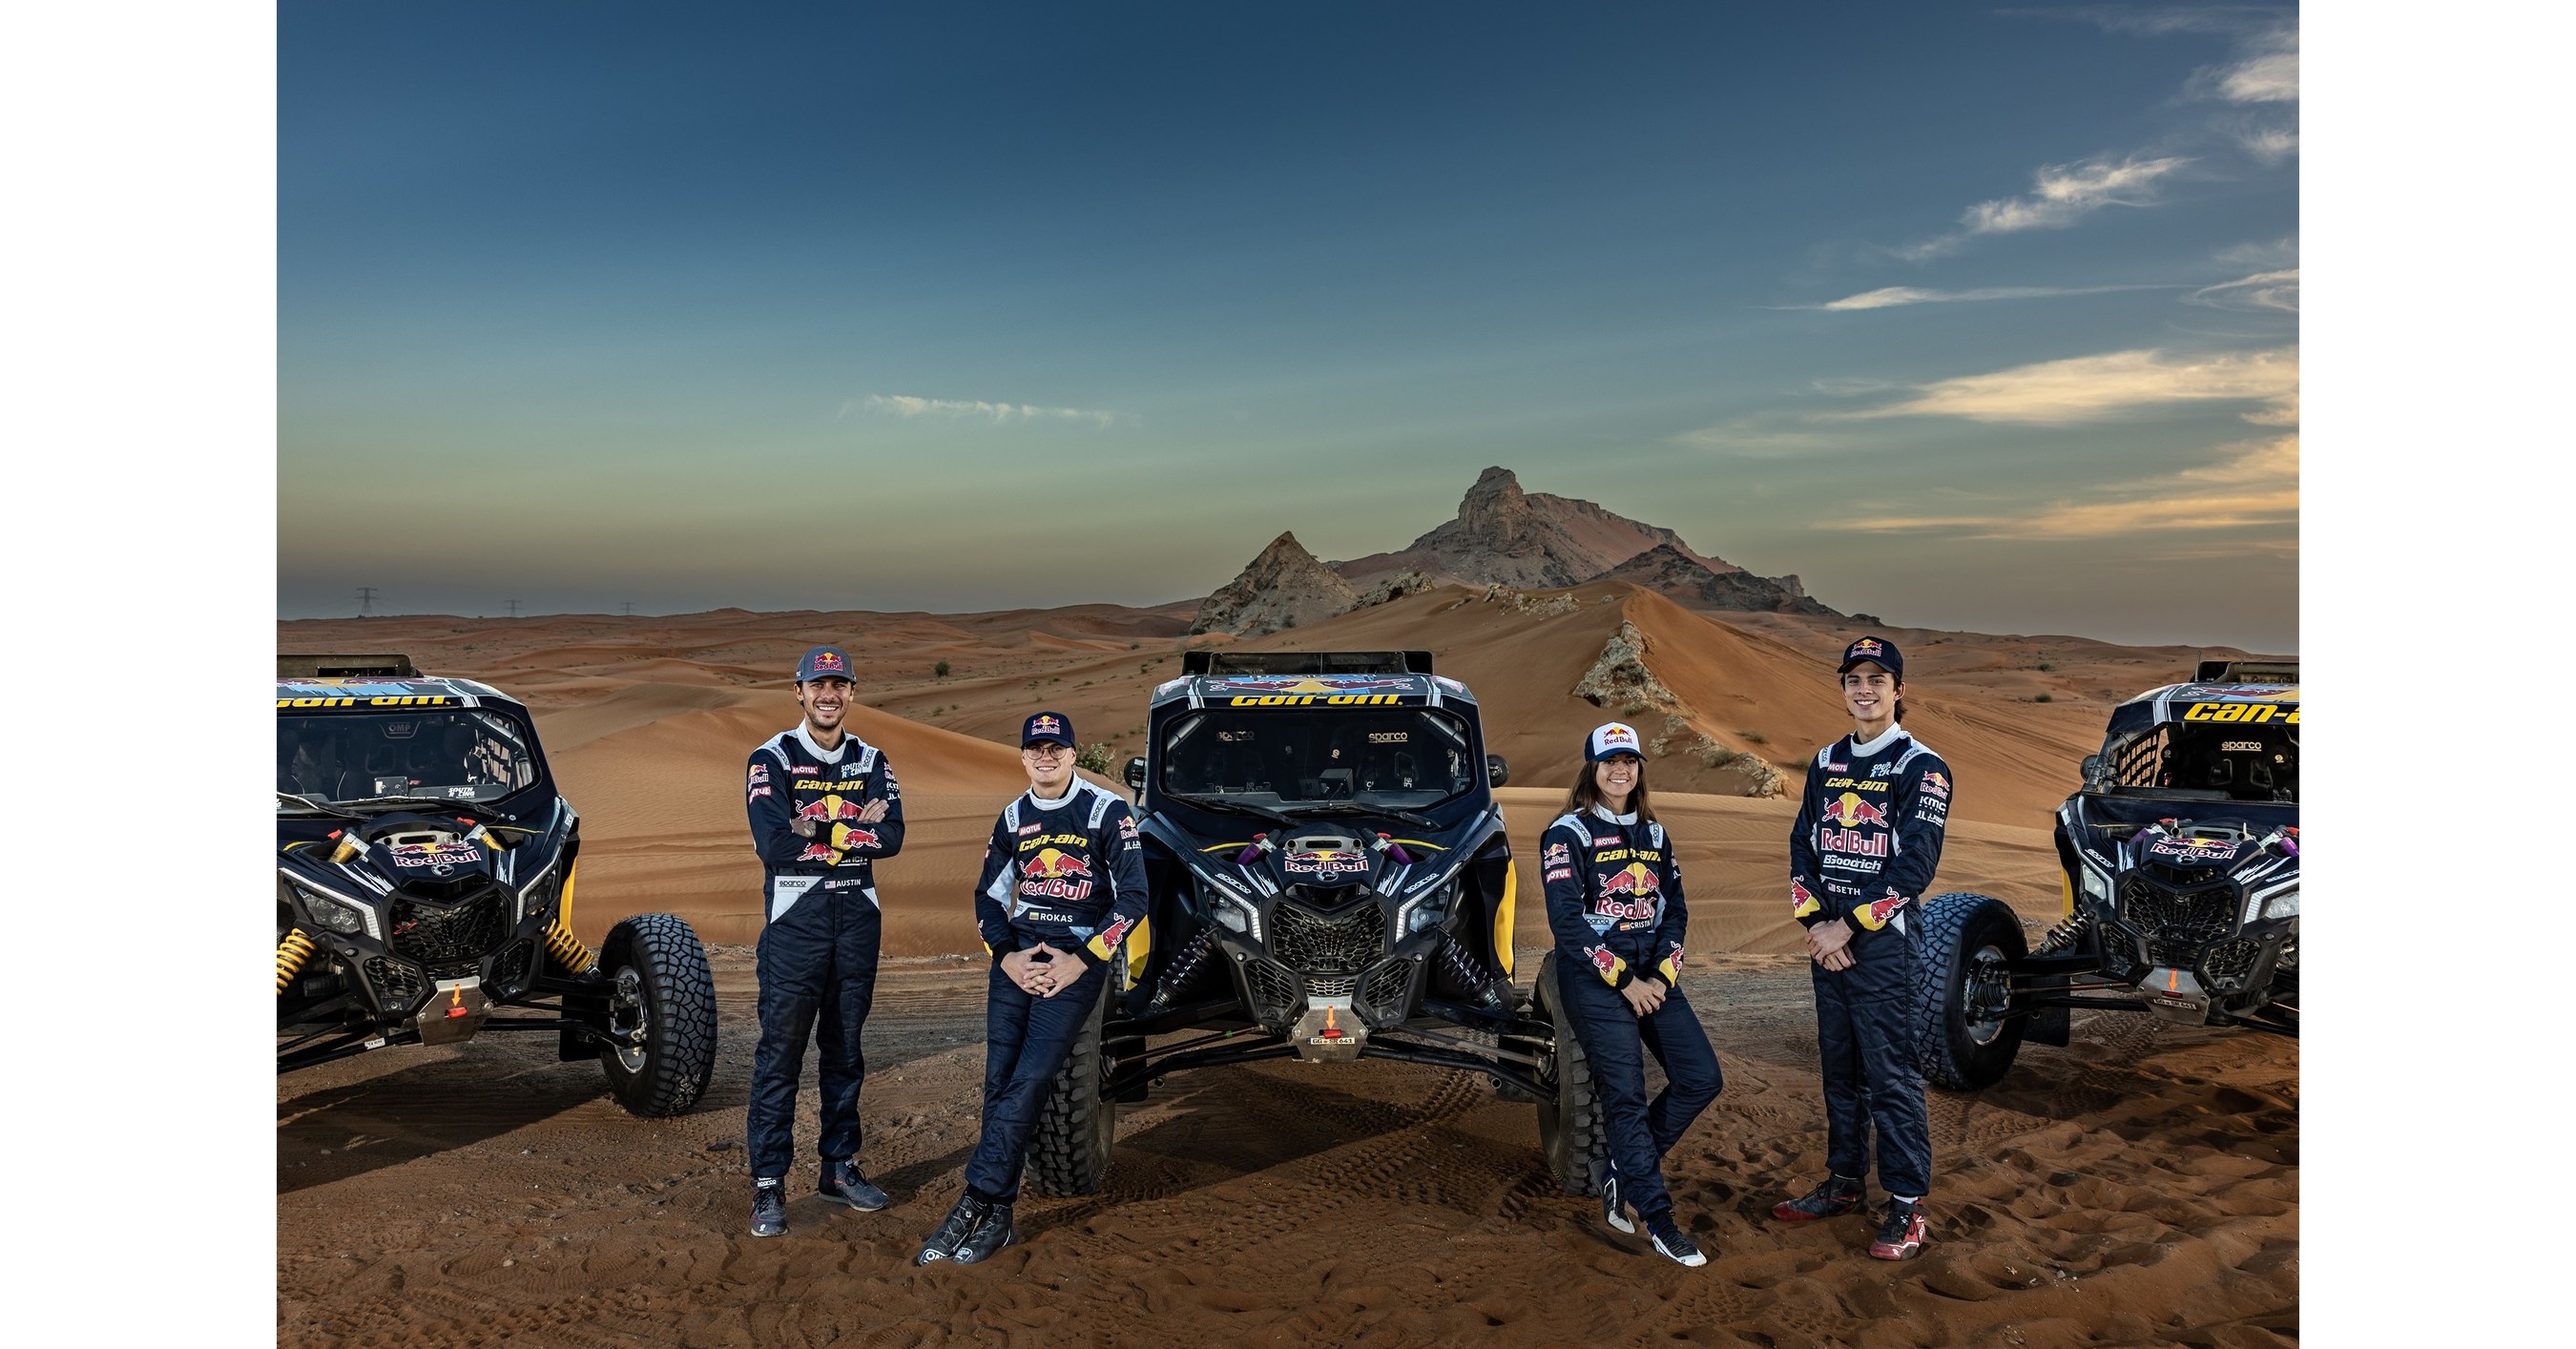 vedvarende ressource shilling teenagere CAN-AM AND RED BULL JOIN FORCES TO TRANSFORM THE FUTURE OF OFF-ROAD RACING